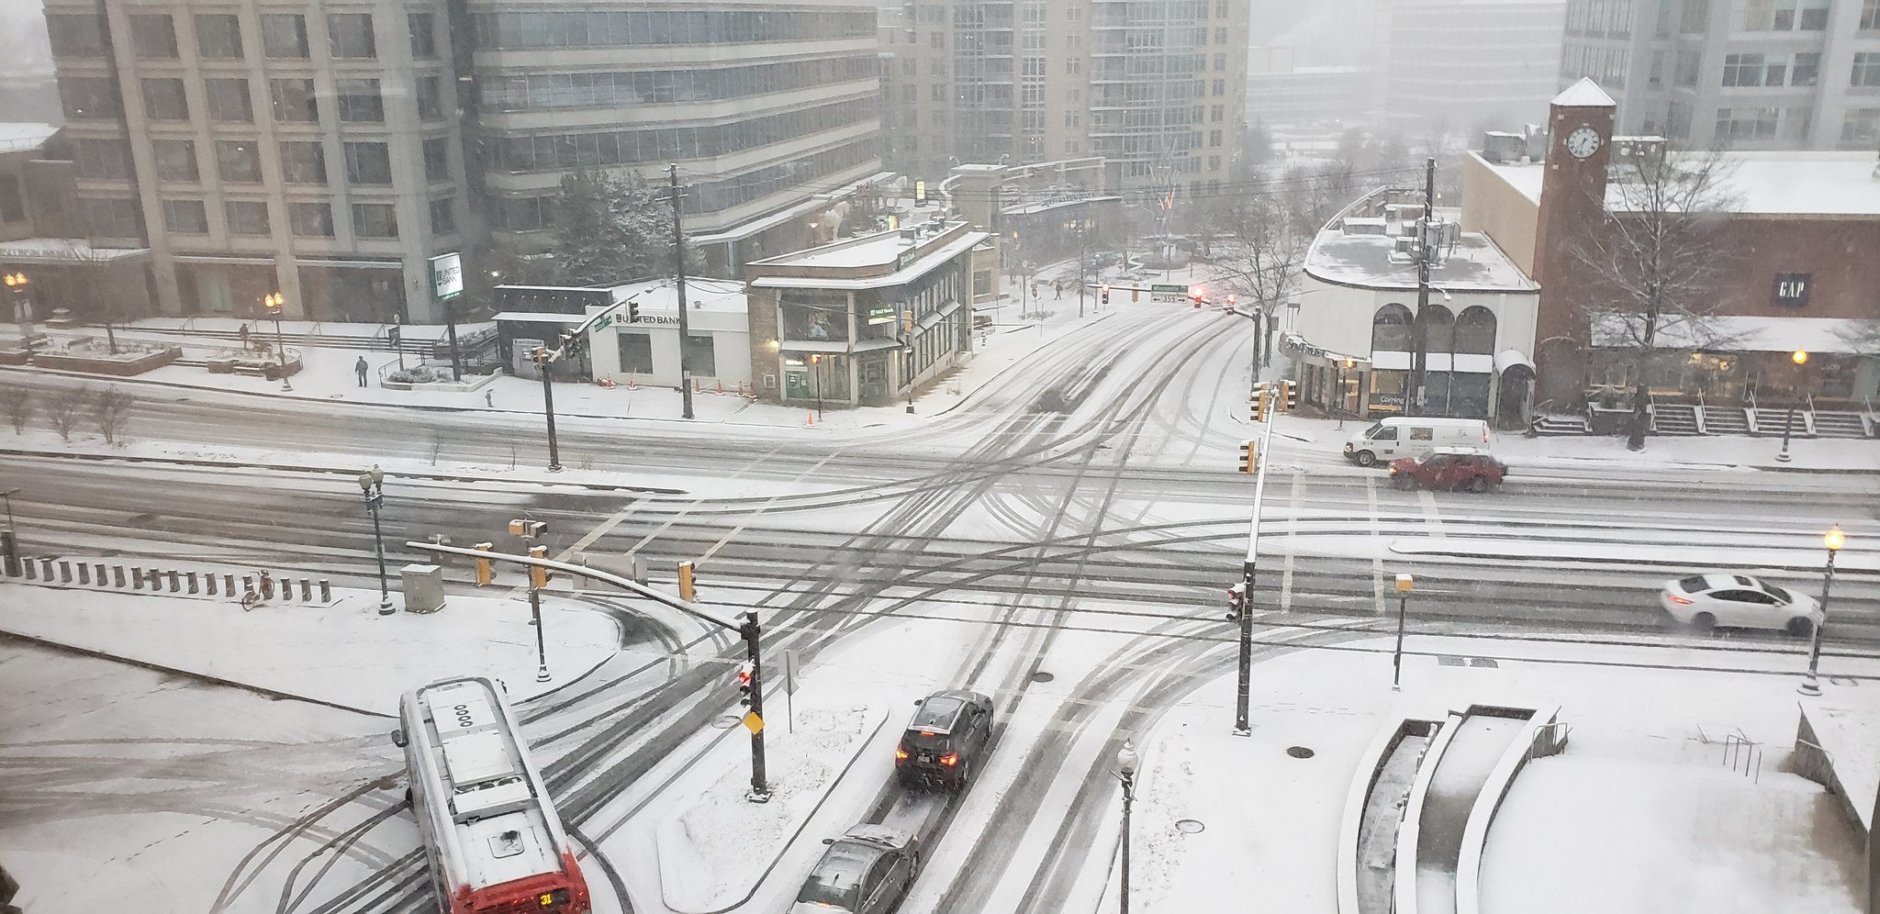 Tire tracks cut through the snow at this Friendship Heights intersection. (WTOP/Brandon Millman)